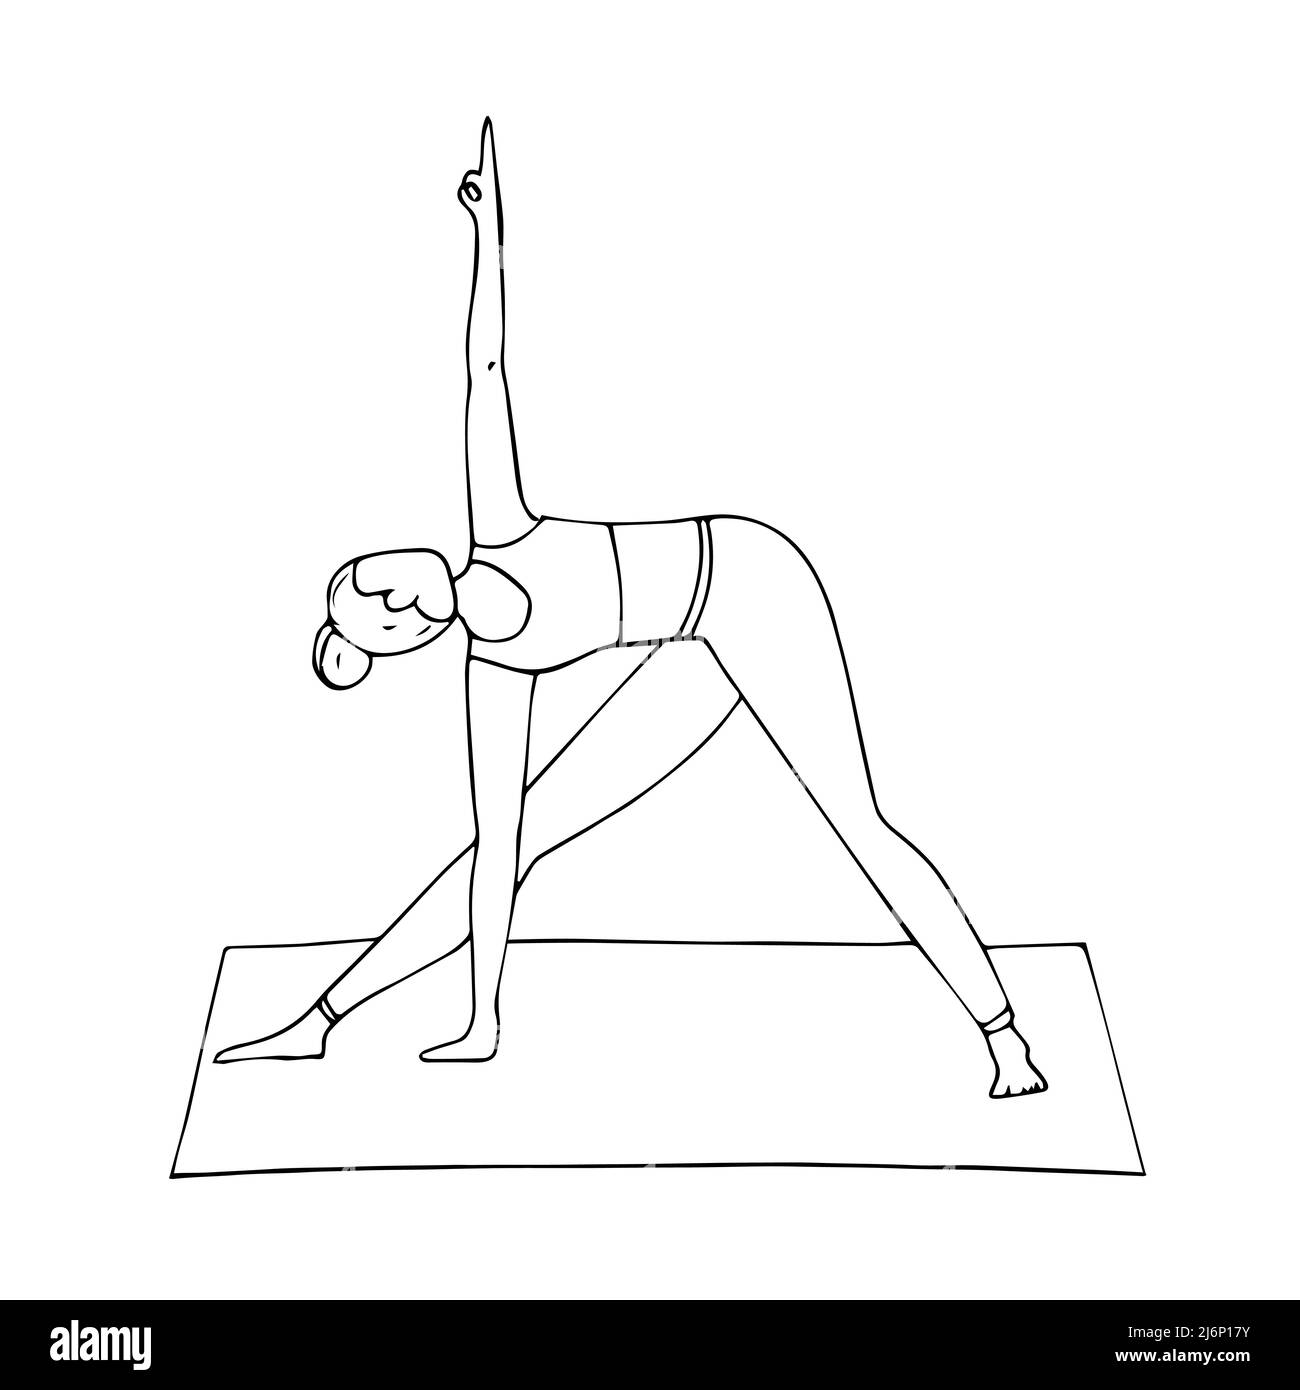 Young girl in yoga pose-triangle pose. Indian culture. Gymnastics, healthy lifestyle. Trikonasana. Doodle style. Black and white vector illustration. Stock Vector